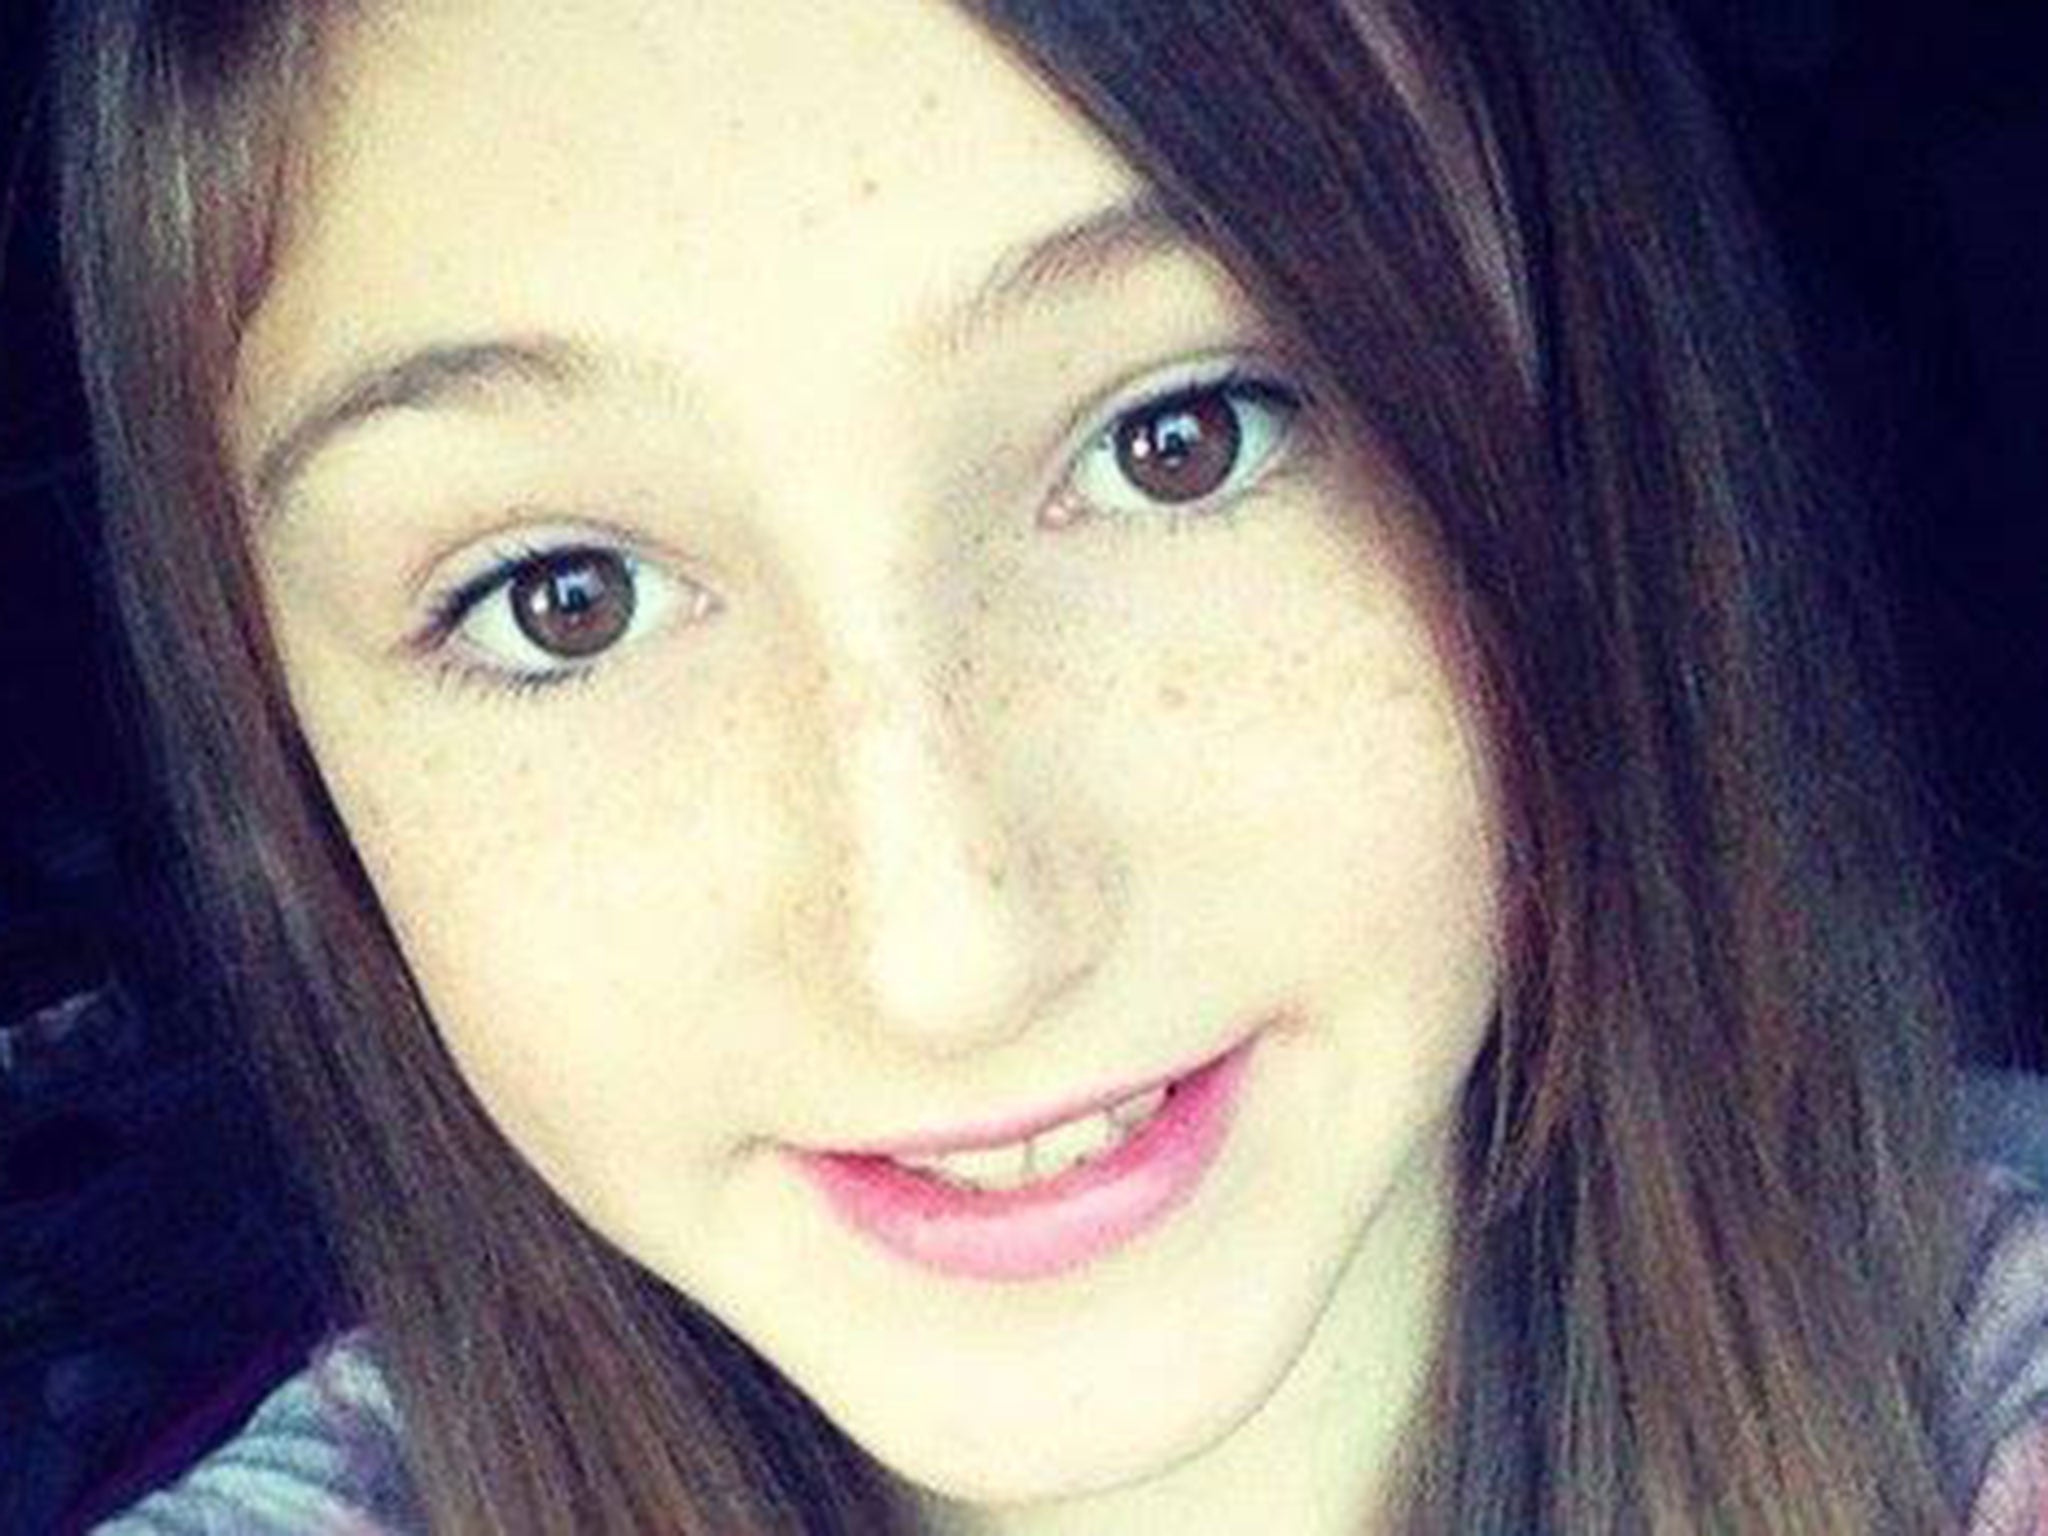 Keane Wallis-Bennett, 12, died at Liberton High School after a "free-standing wall" collapsed onto her